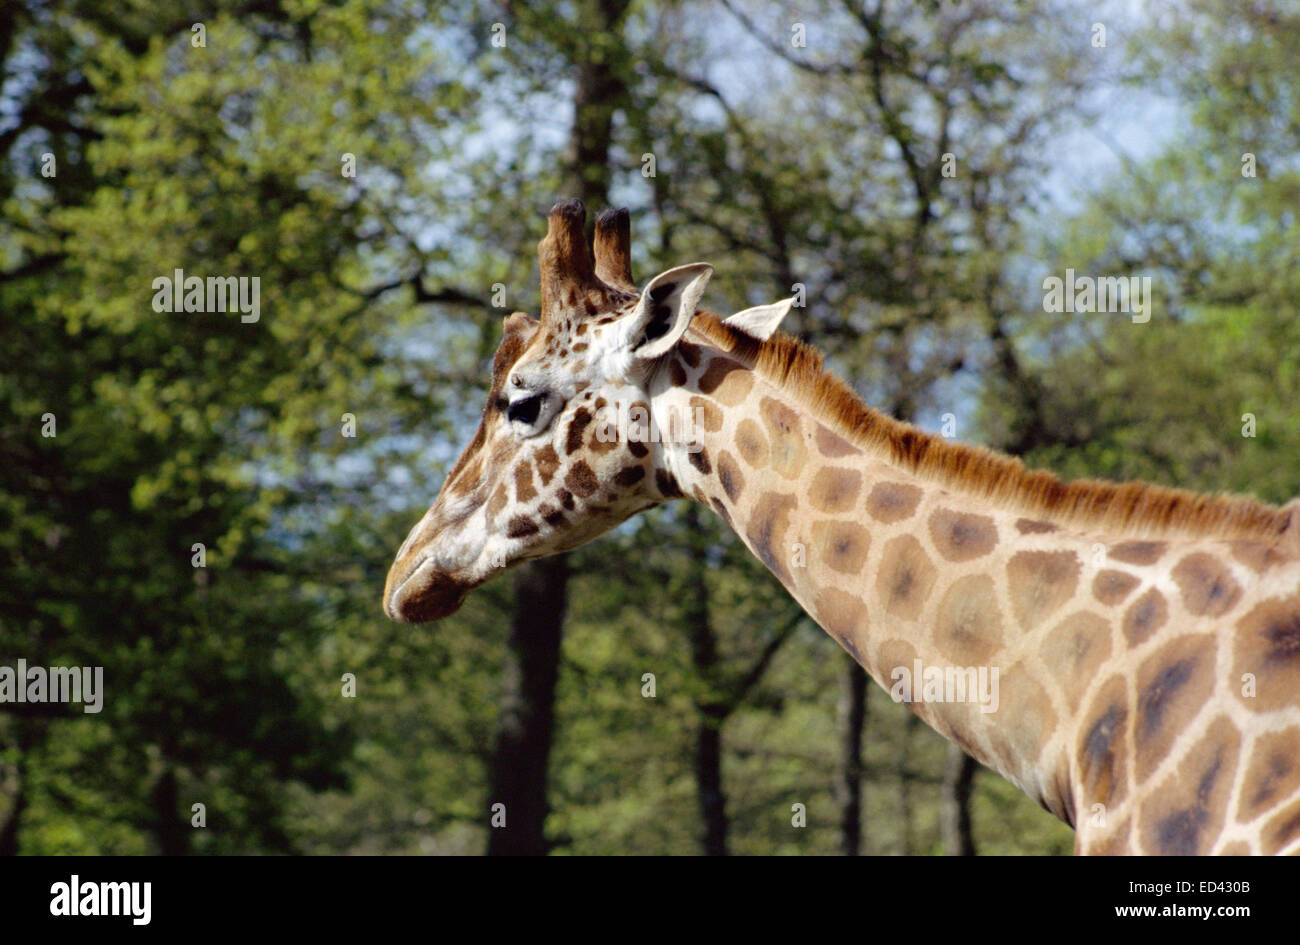 Giraffe's head and neck in front of trees and spring foliage Stock Photo